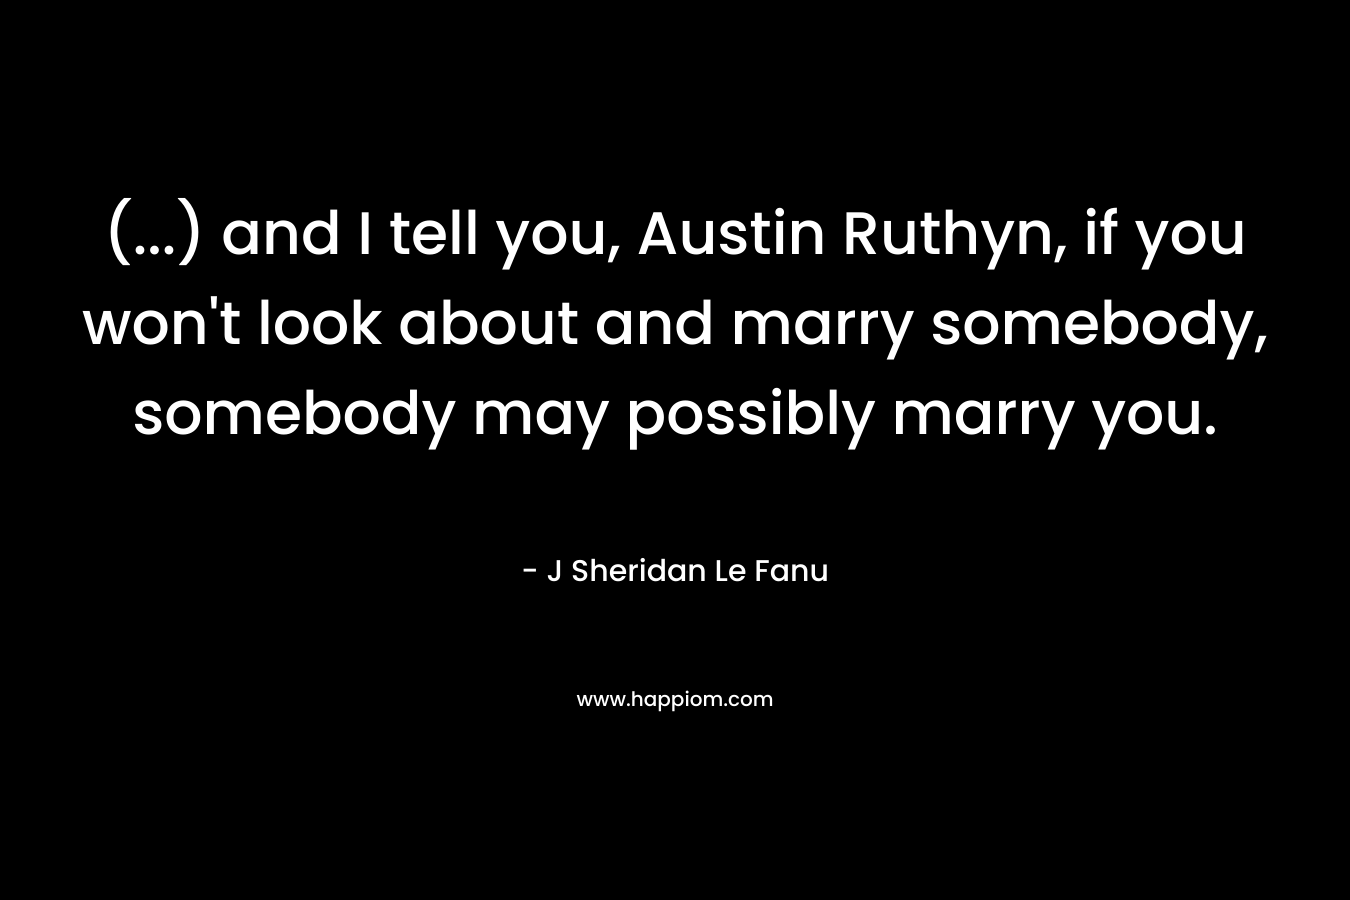 (…) and I tell you, Austin Ruthyn, if you won’t look about and marry somebody, somebody may possibly marry you. – J Sheridan Le Fanu